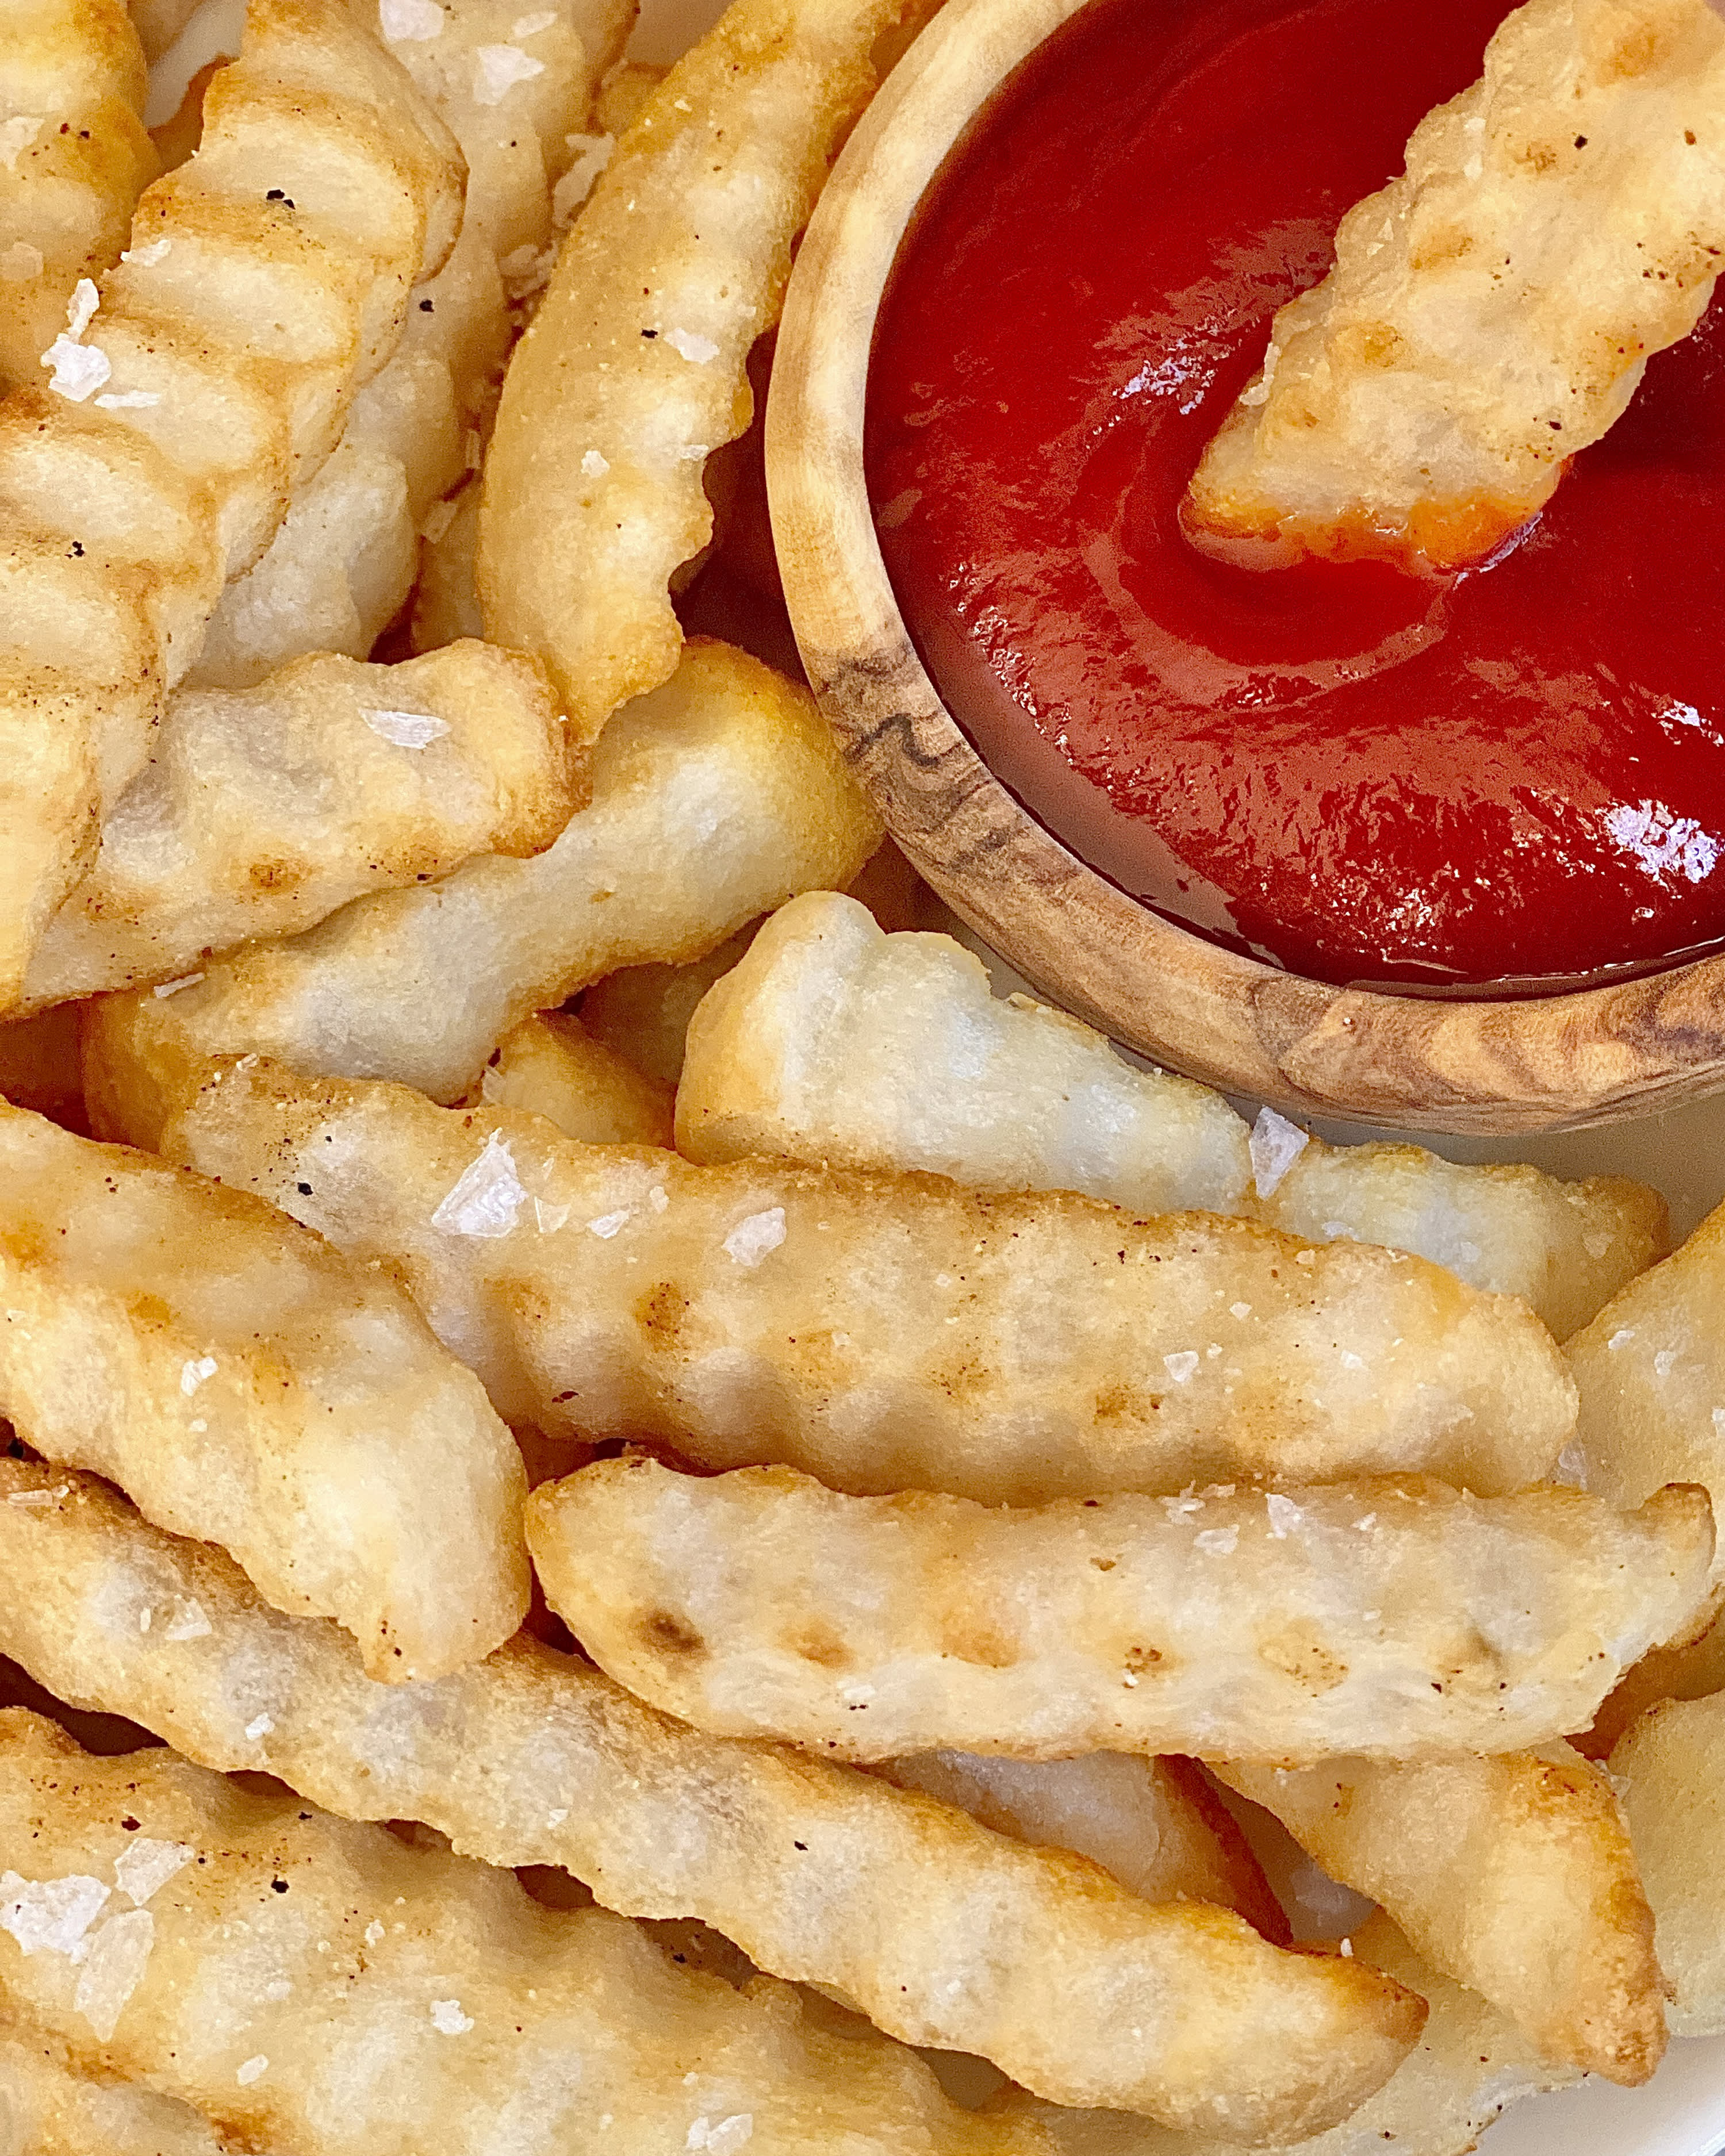 14 Popular Frozen French Fry Brands, Ranked Worst To Best